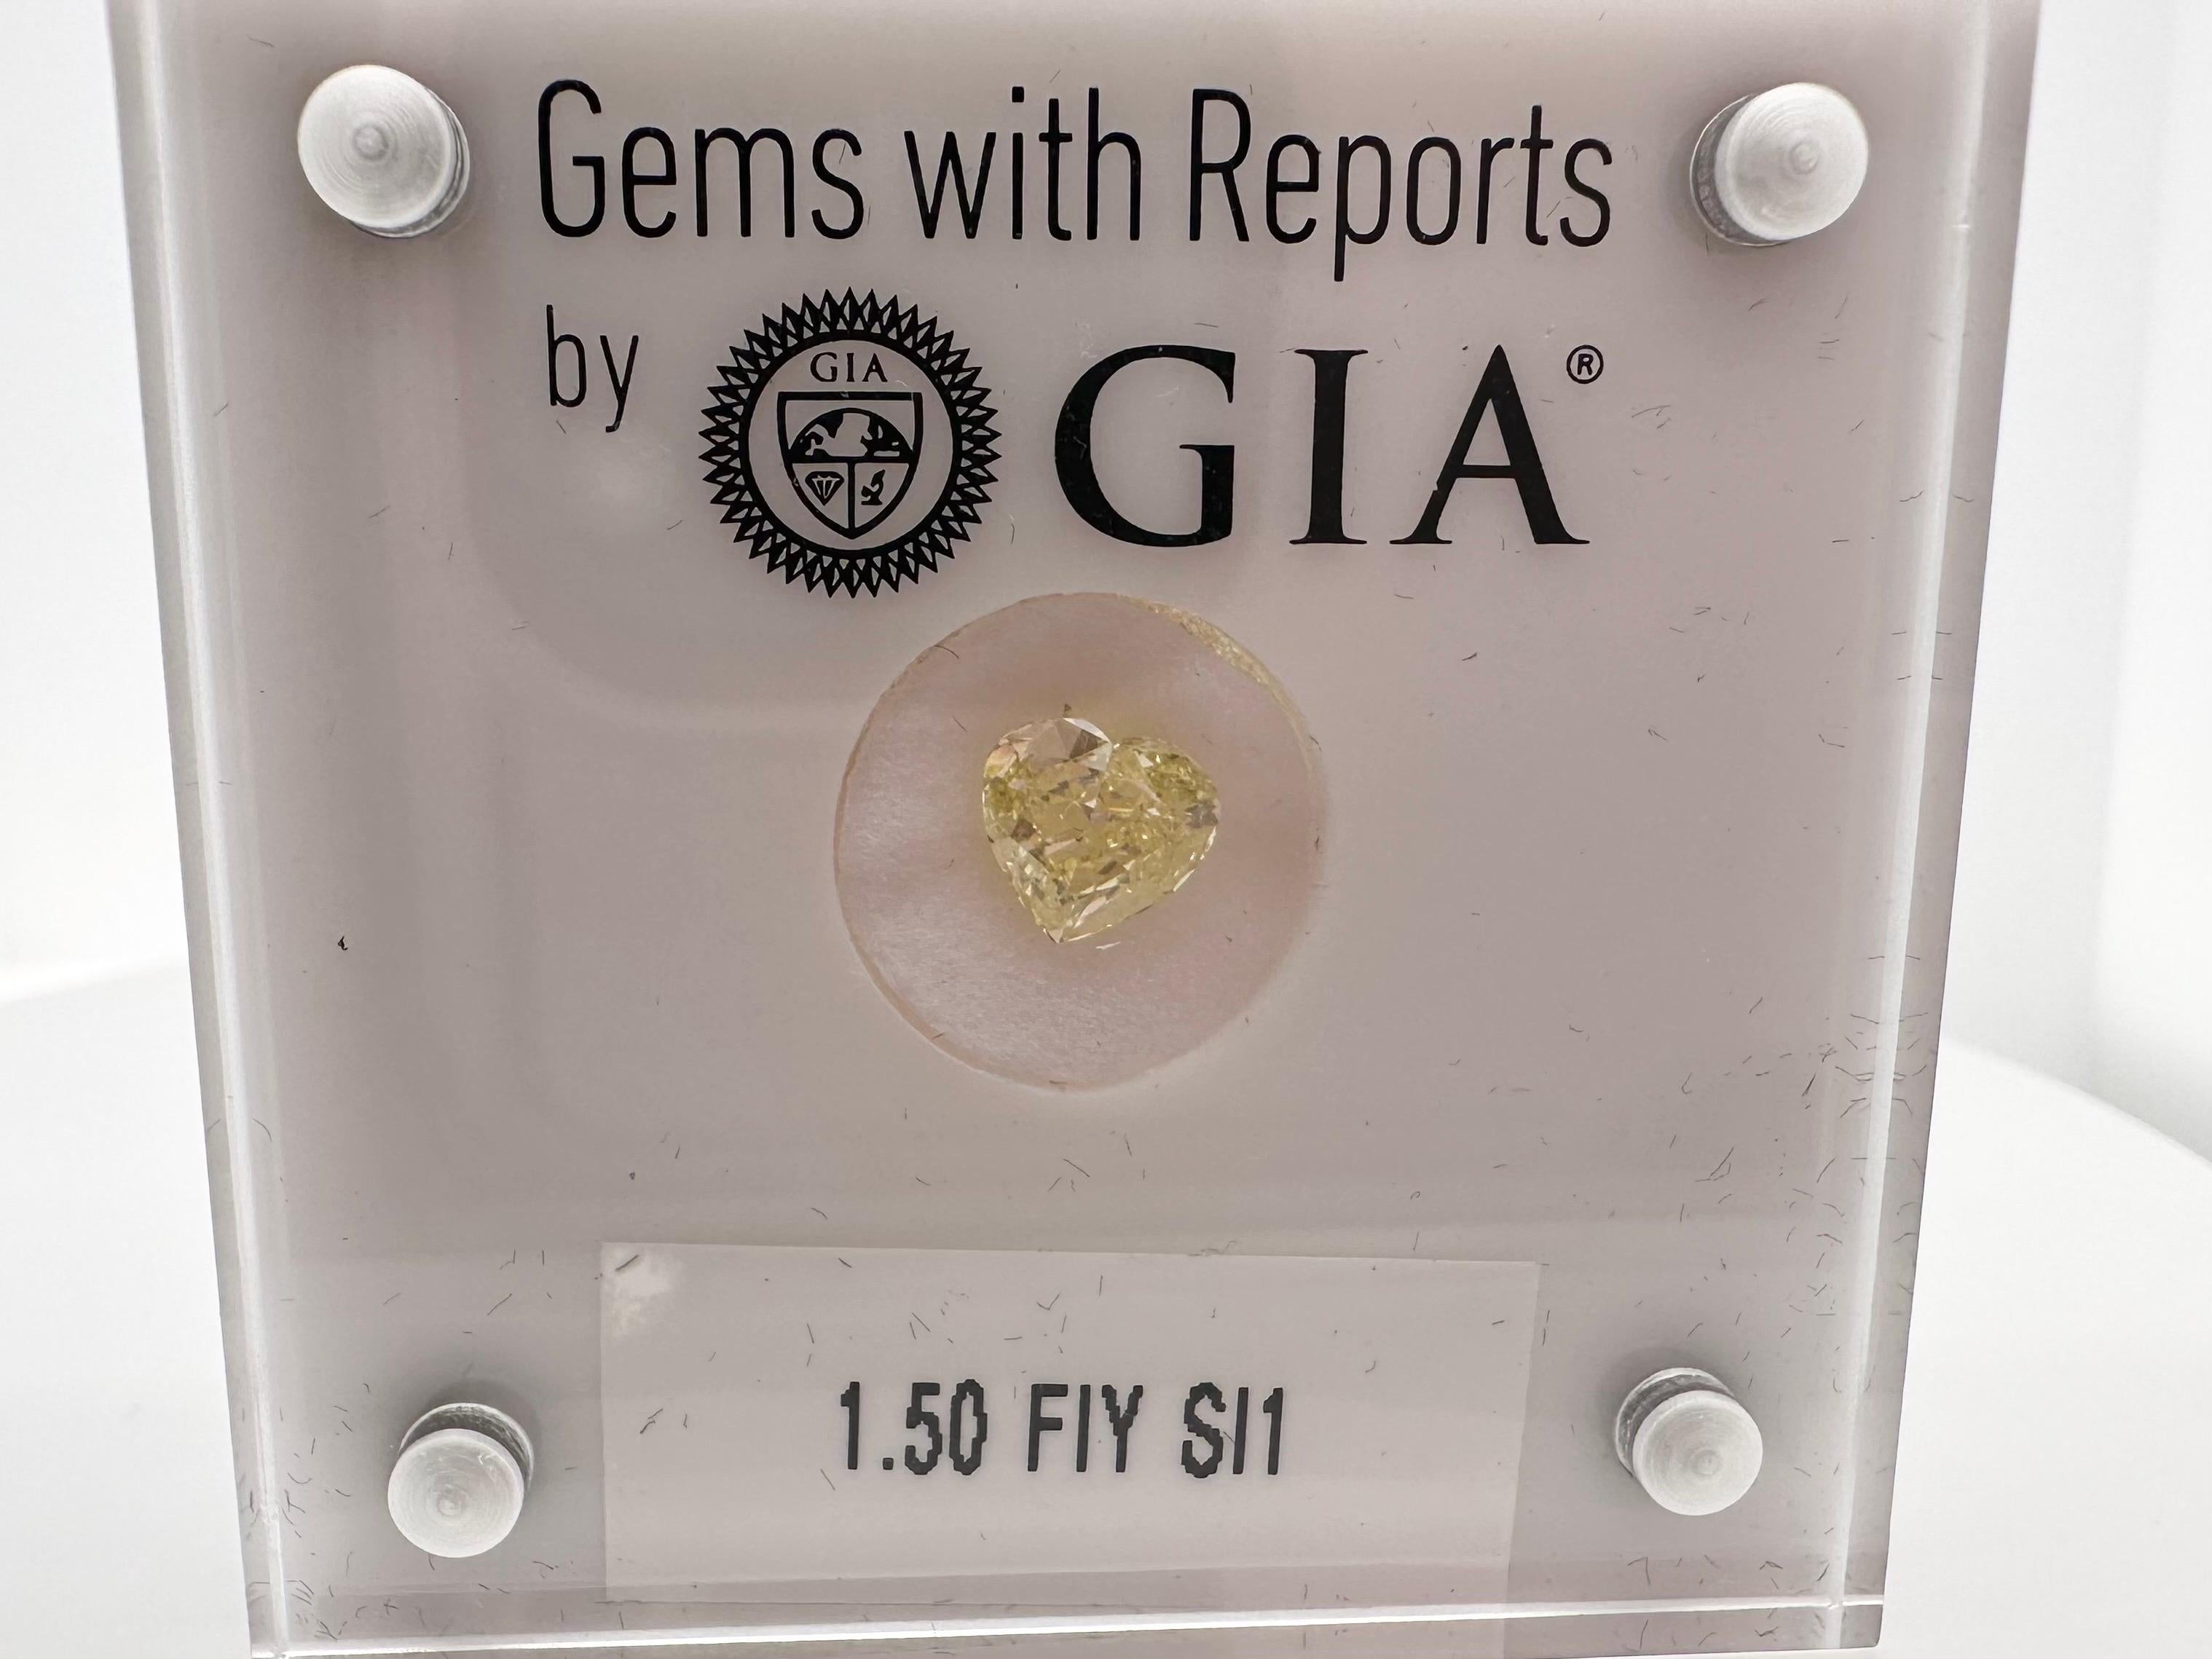 GIA certified diamond, natural fancy intense yellow diamond weighing 1.50ct.

Natural Color Diamond:
Color: Fancy Intense Yellow
Cut: Heart Brilliant
Carat: 1.50ct
Clarity: SI1

Certificate of authenticity comes with purchase

ABOUT US
We are a